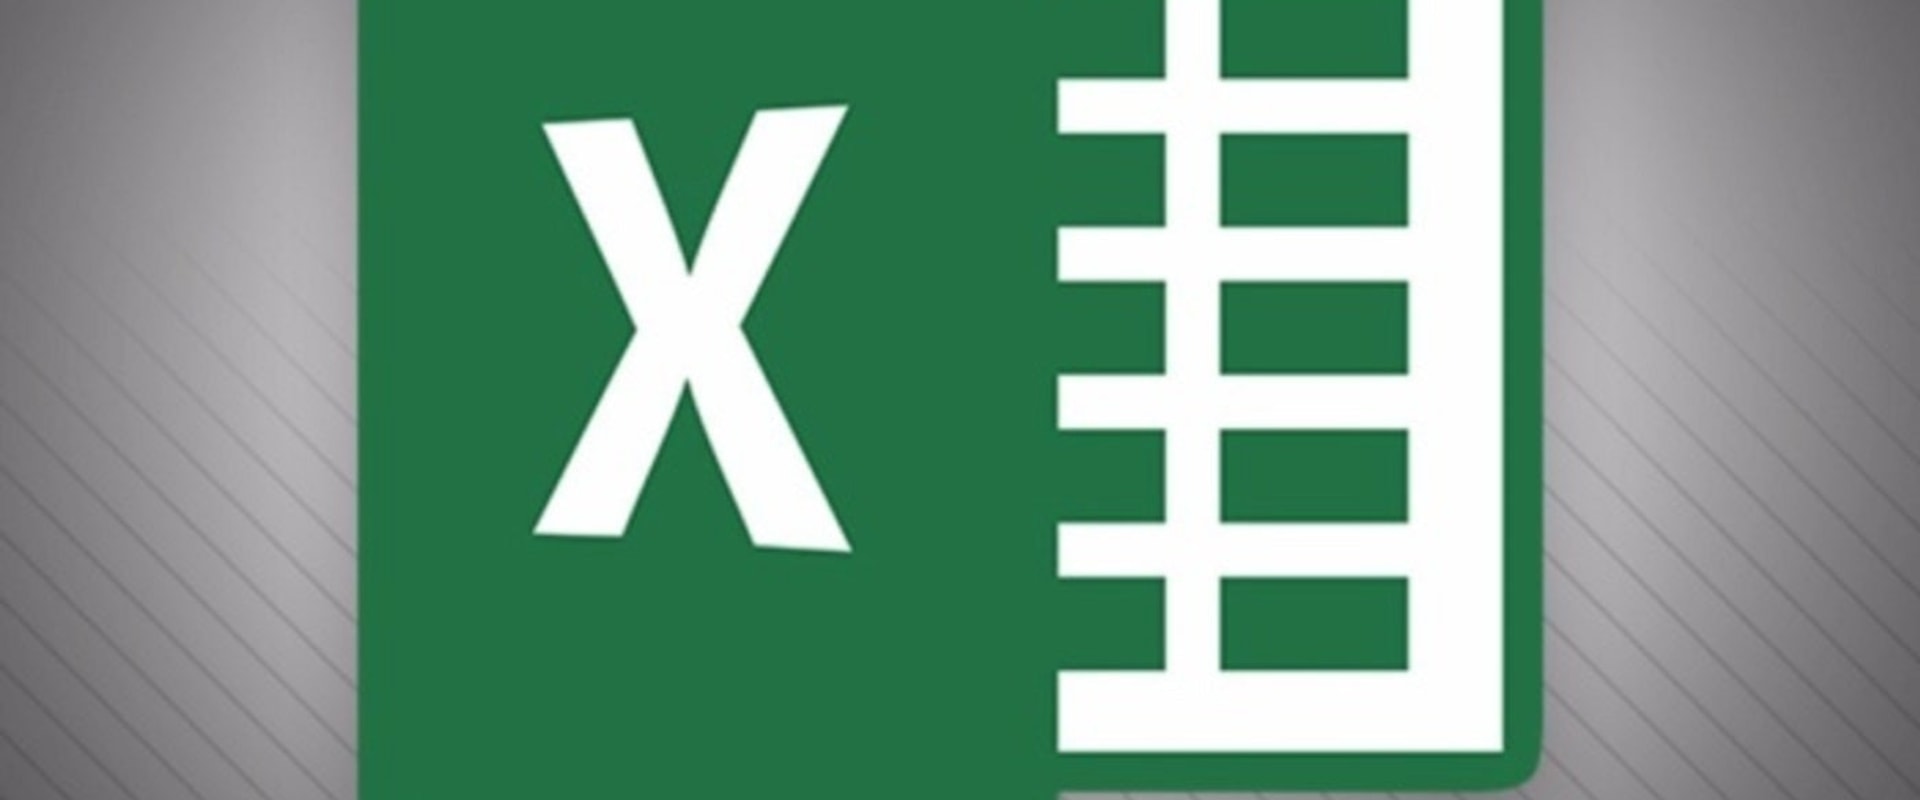 Is excel a software tools?